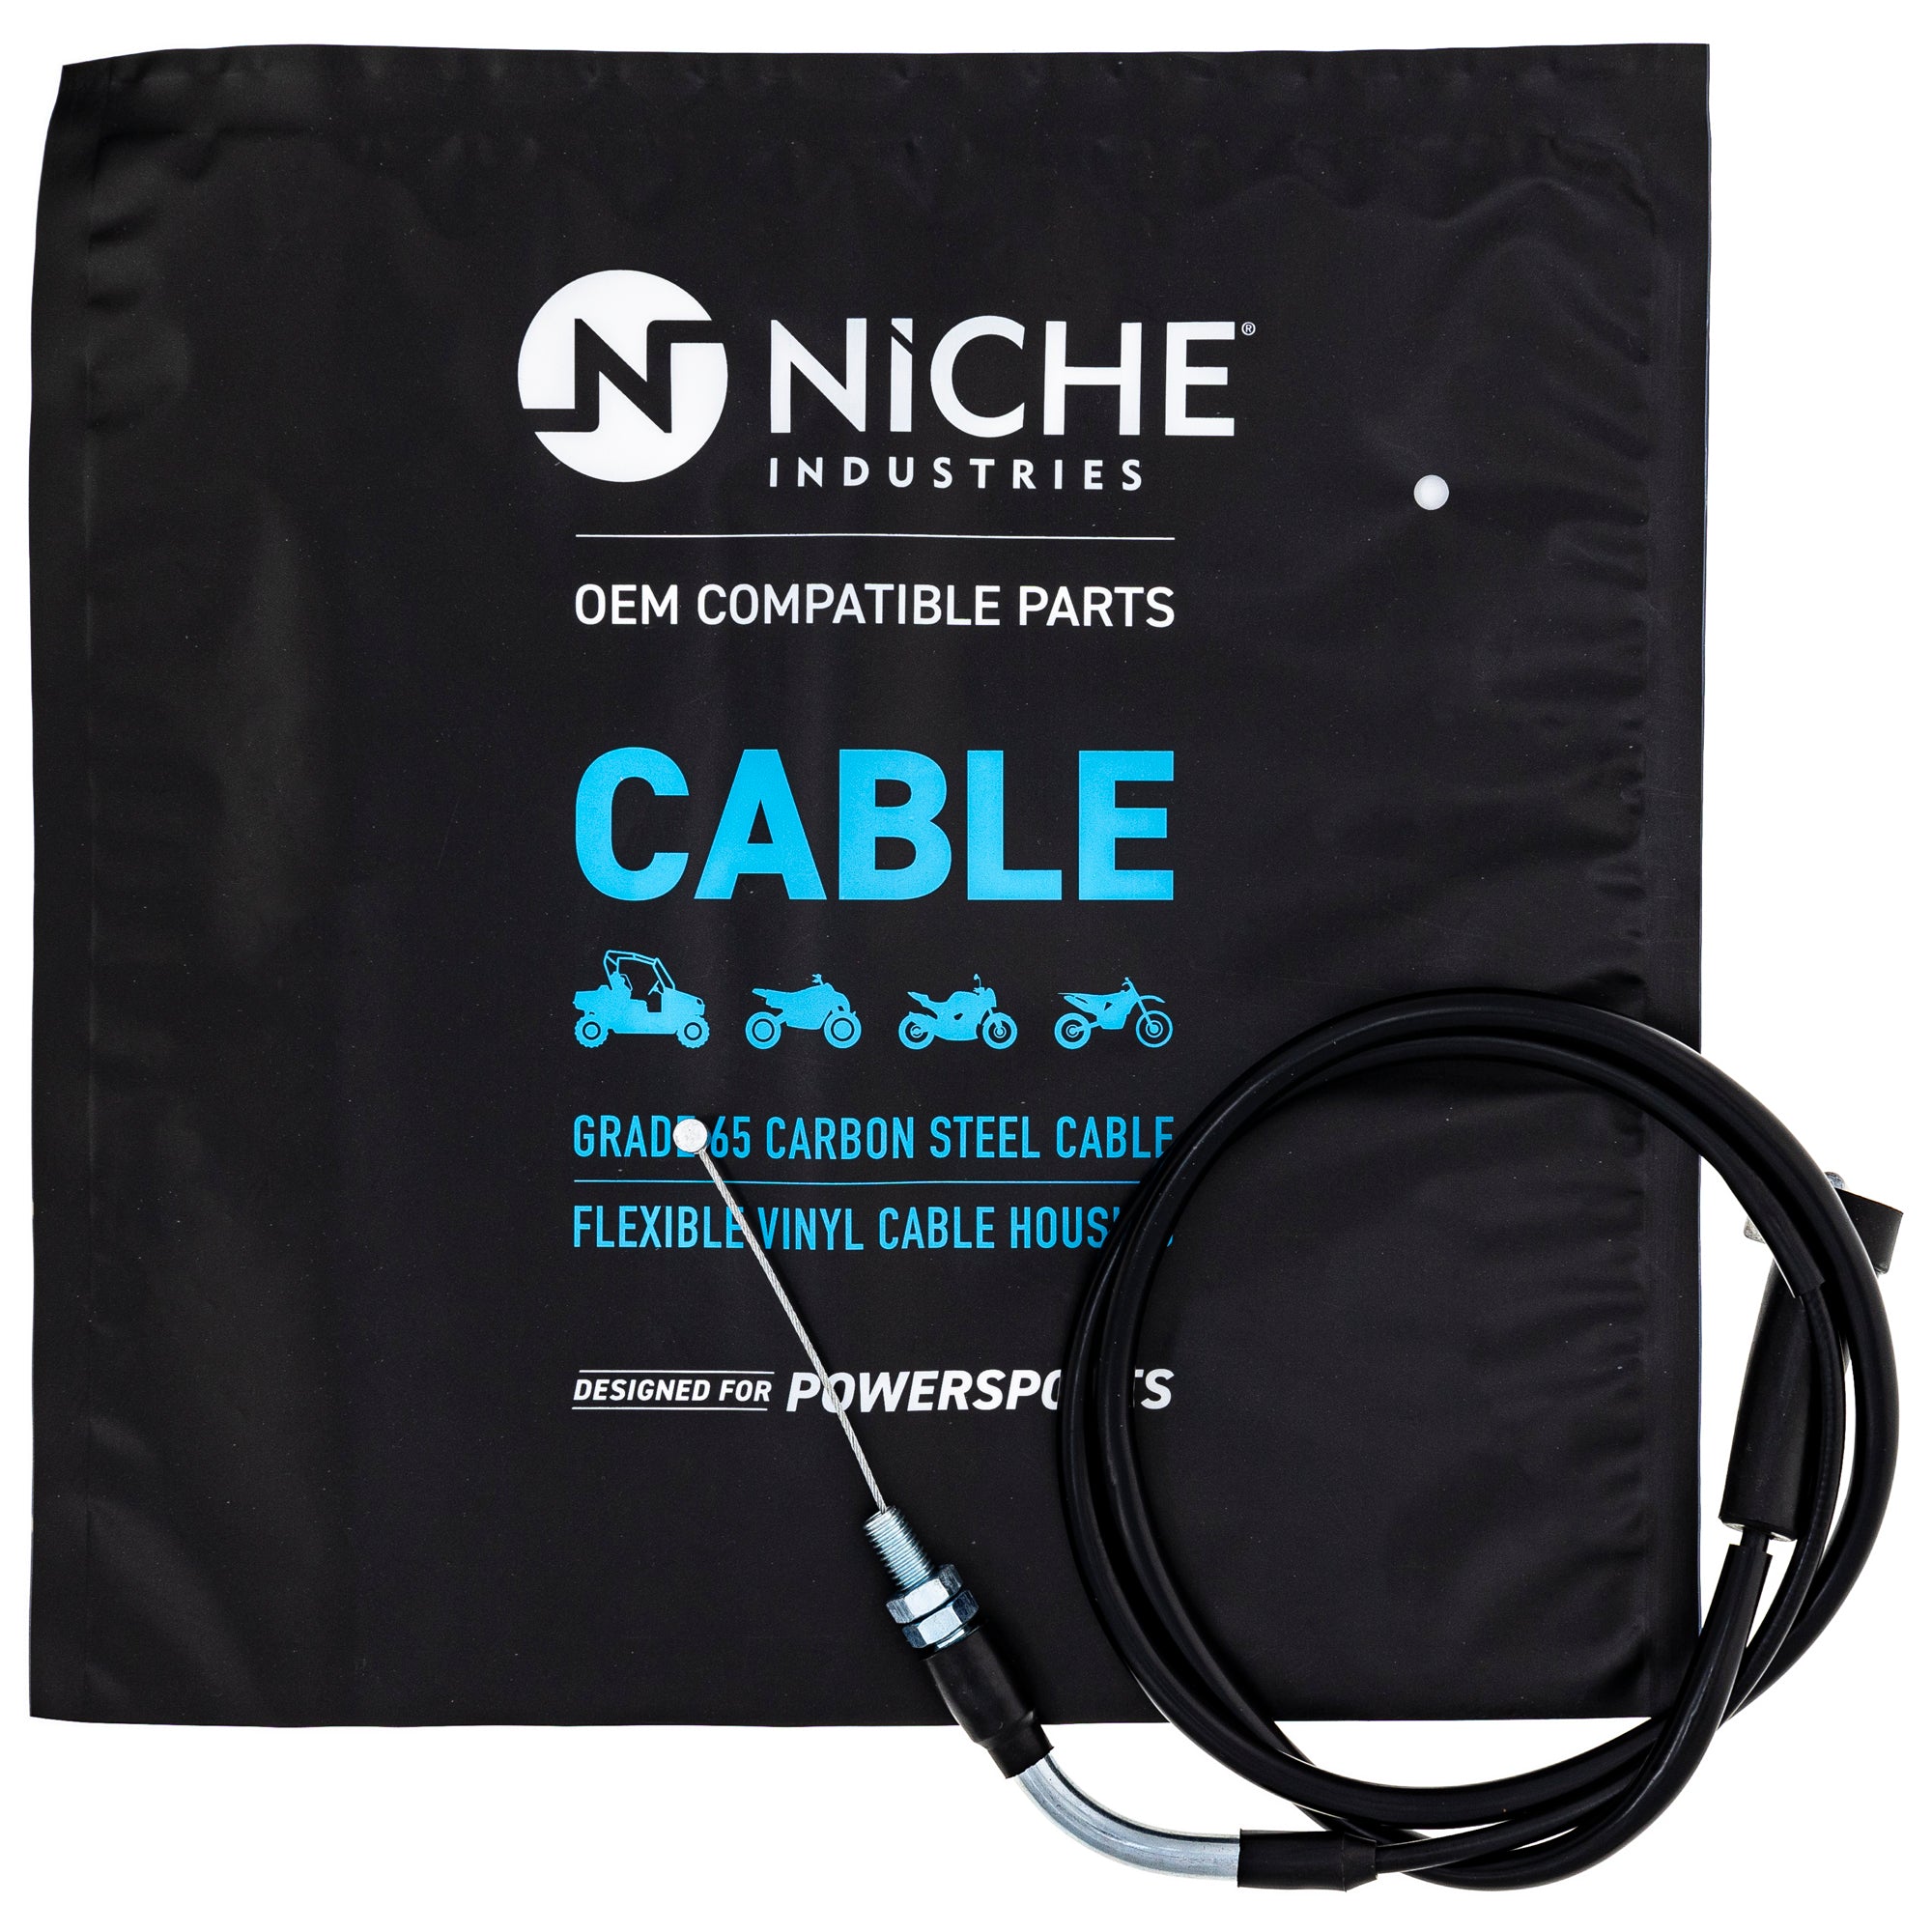 NICHE 519-CCB2382L Throttle Cable for zOTHER Quadracer